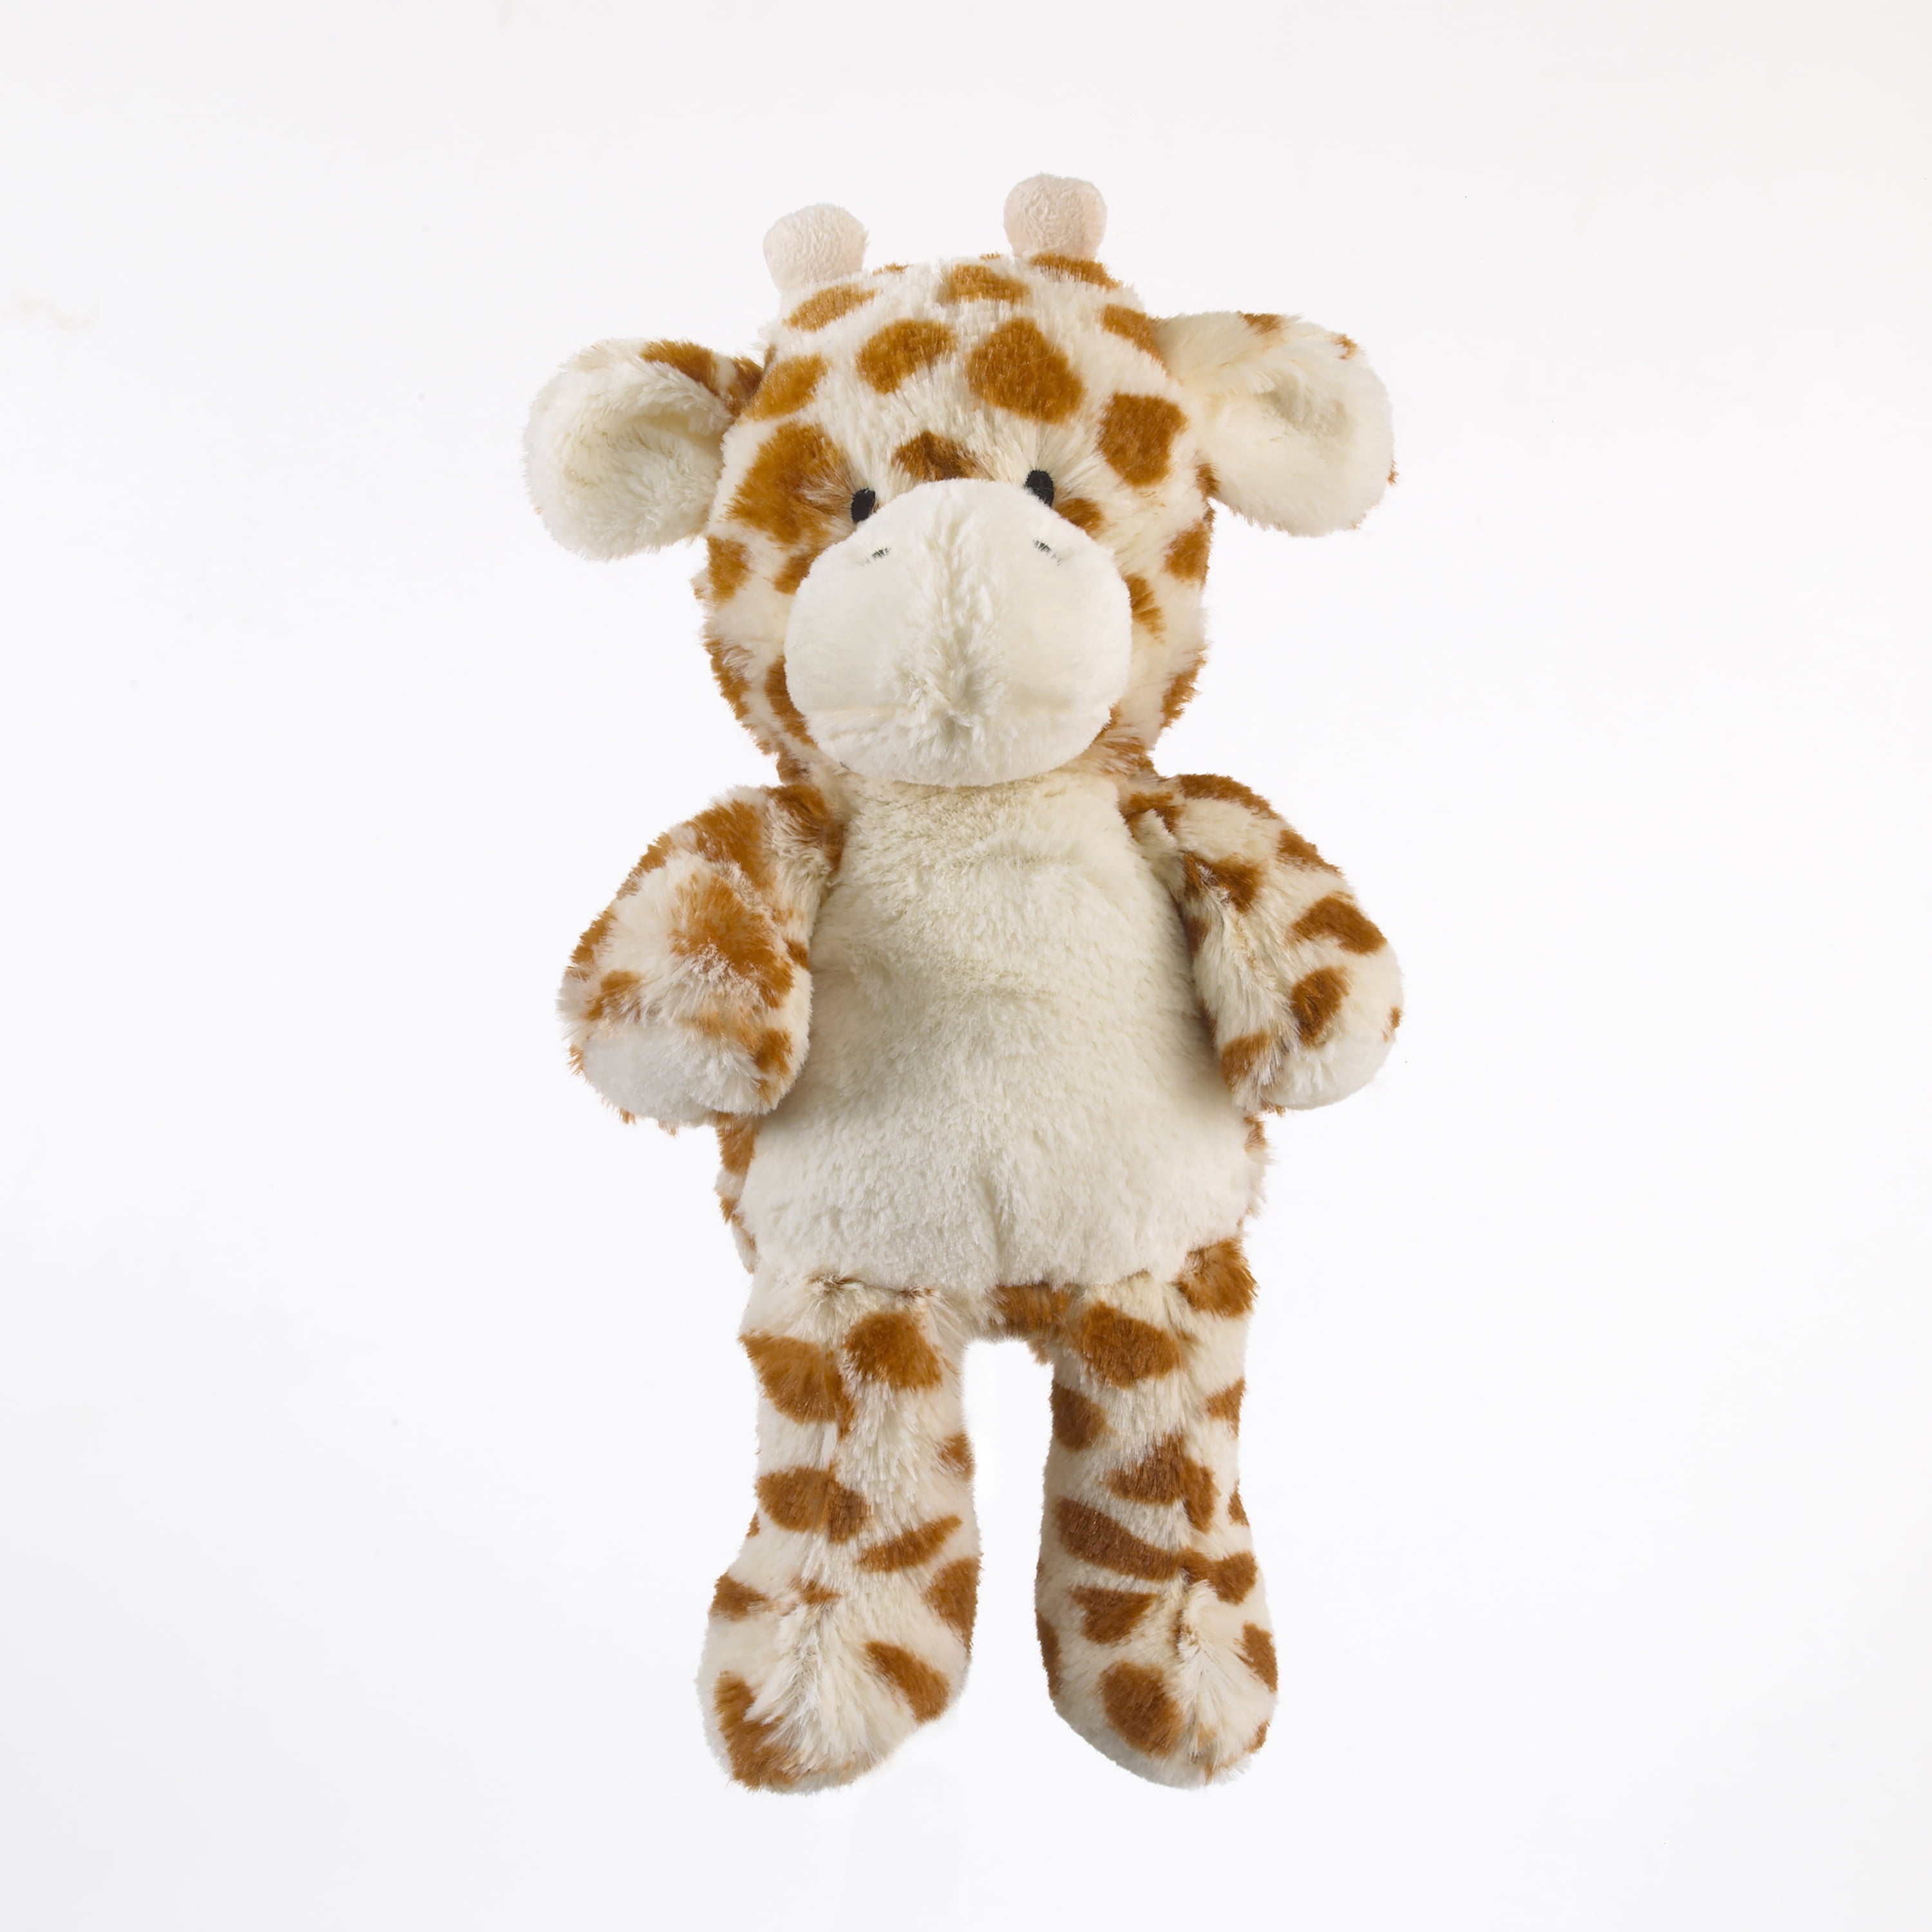 LOSOUL Giraffe Cute Stuffed Animal Plush Toy Adorable Soft Giraffe Toy Plushies and Gifts Perfect Present for Kids Toddlers 18CM Babies 